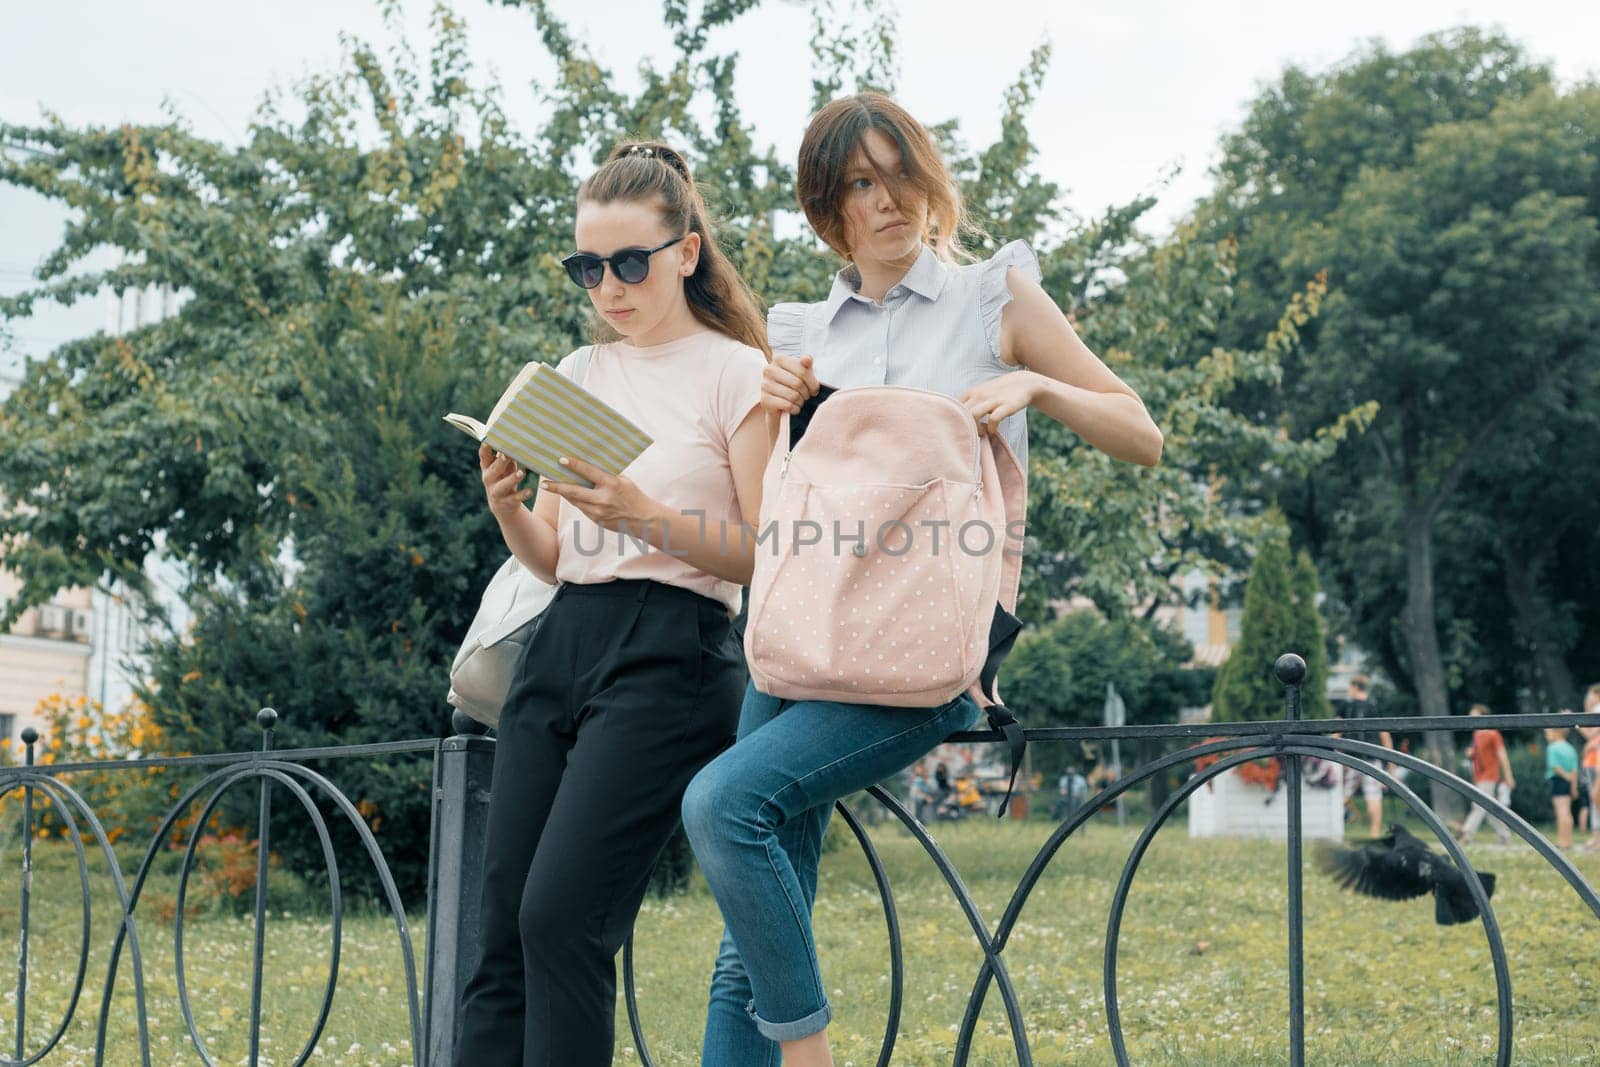 Two learning girls students with backpacks and textbooks outdoor in a park.